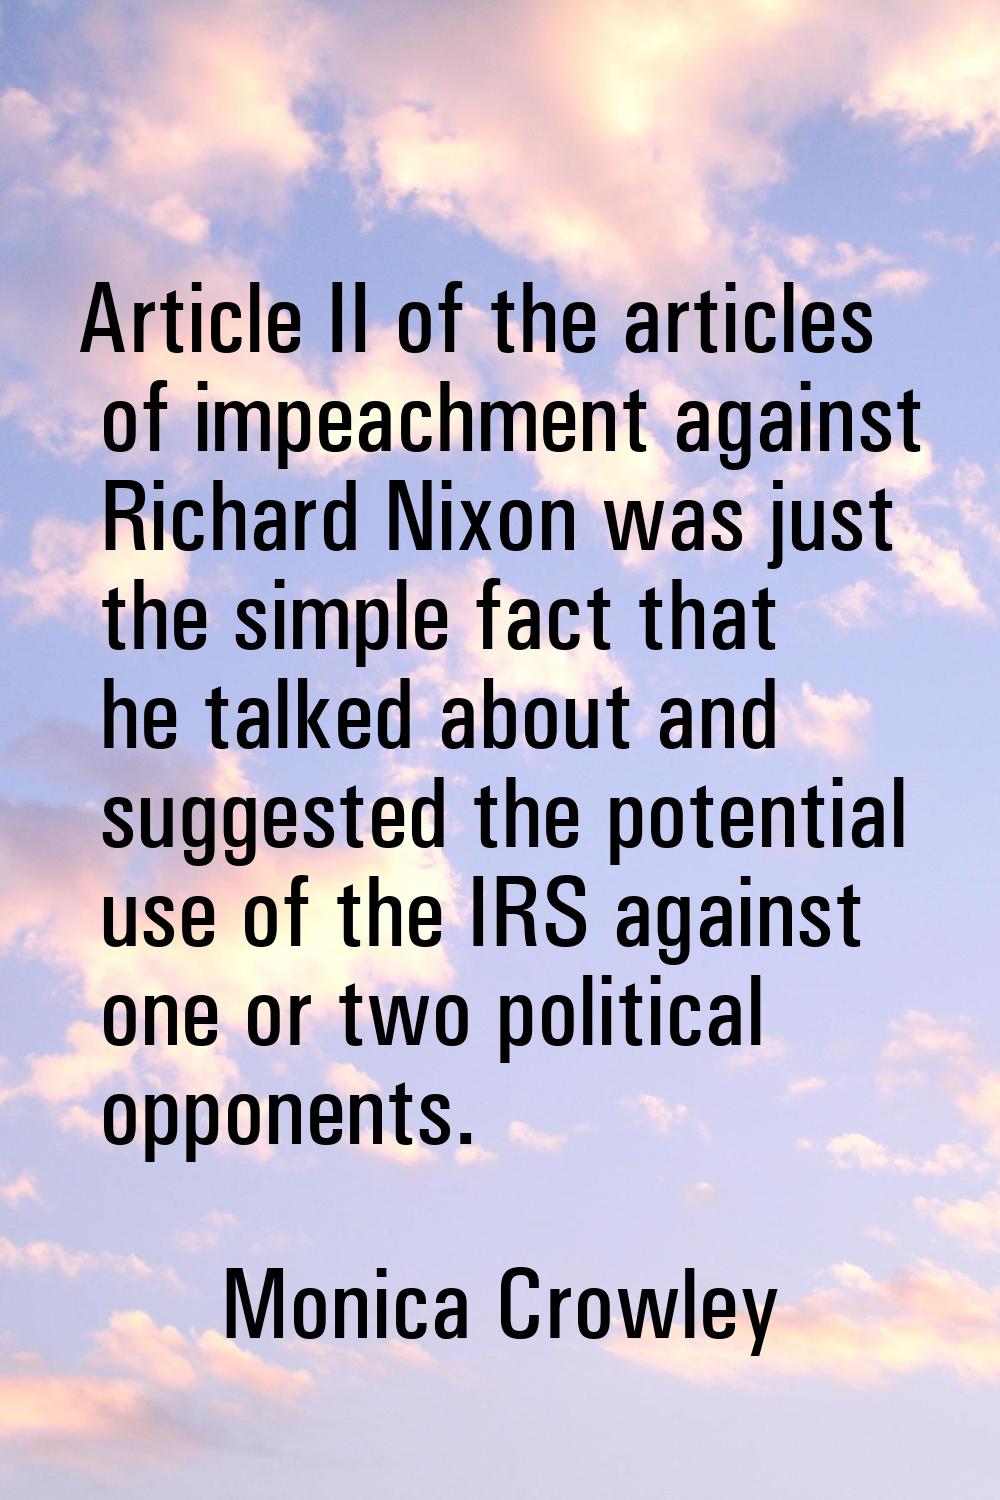 Article II of the articles of impeachment against Richard Nixon was just the simple fact that he ta